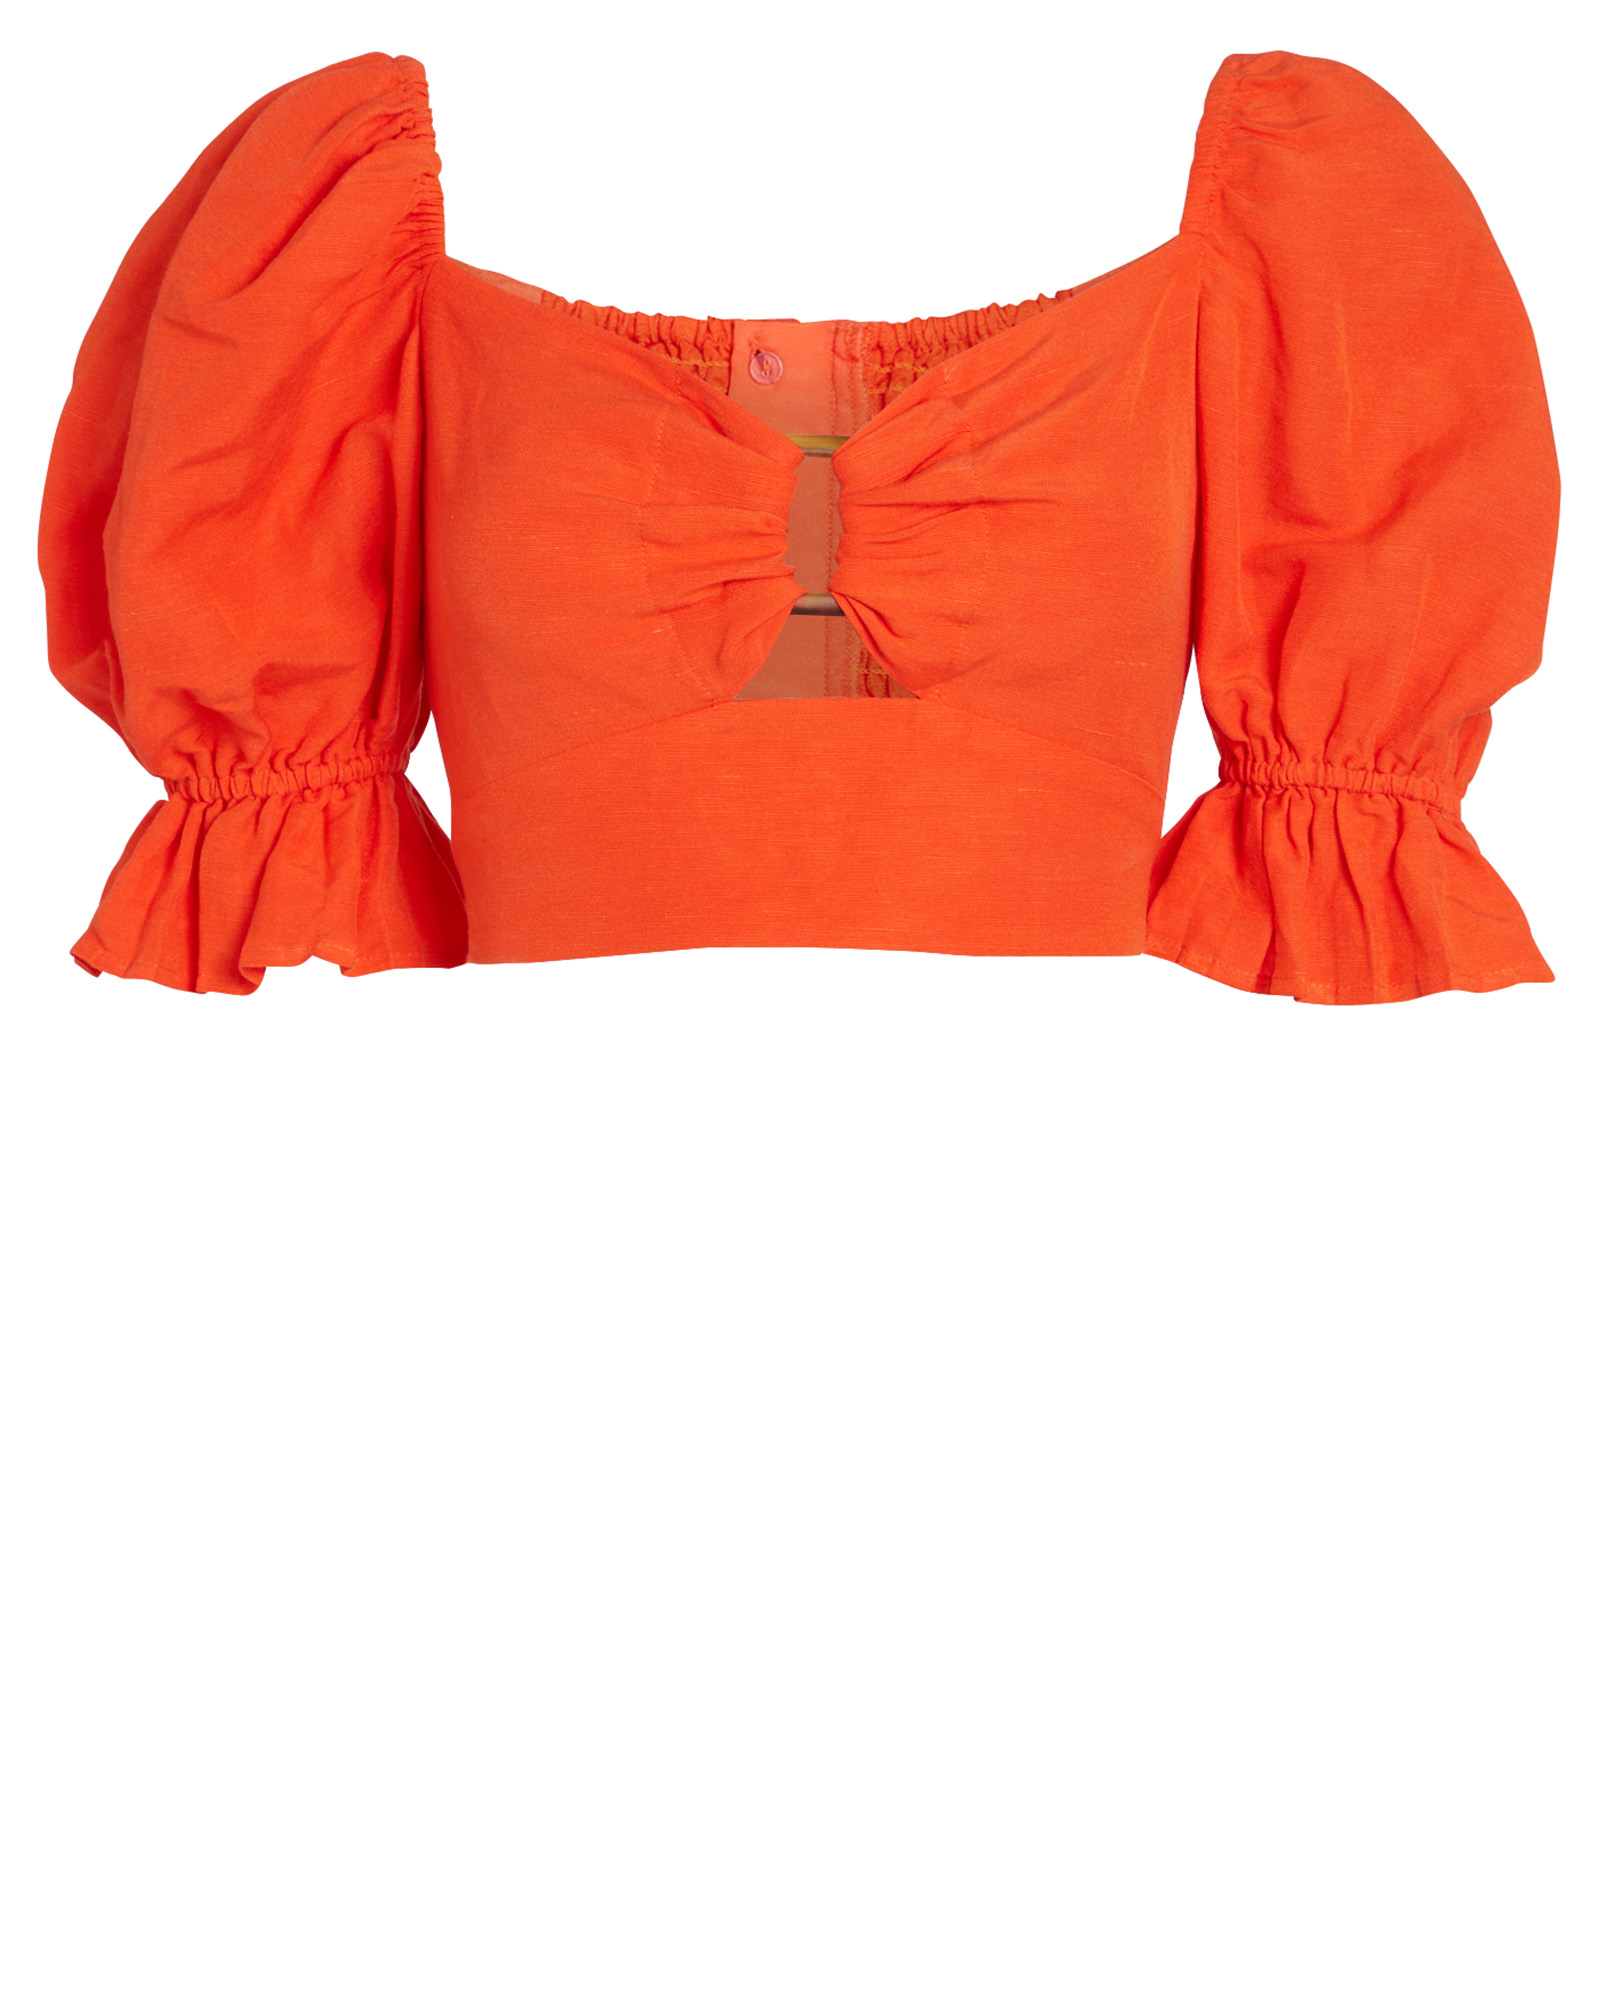 C/MEO COLLECTIVE Early On Top Crop Top,060049504990